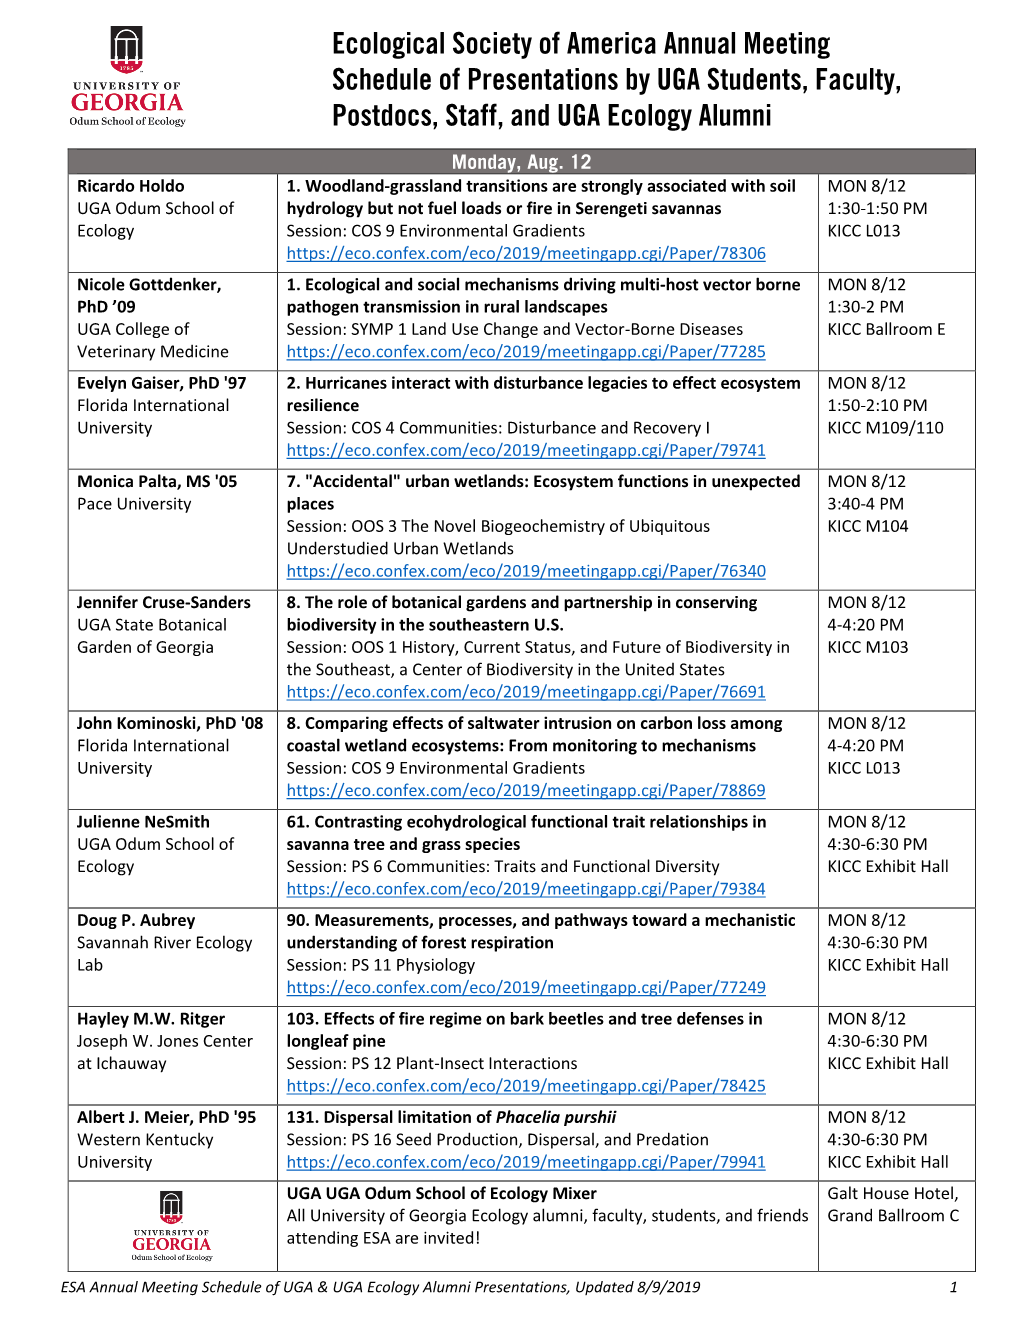 Ecological Society of America Annual Meeting Schedule of Presentations by UGA Students, Faculty, Postdocs, Staff, and UGA Ecology Alumni